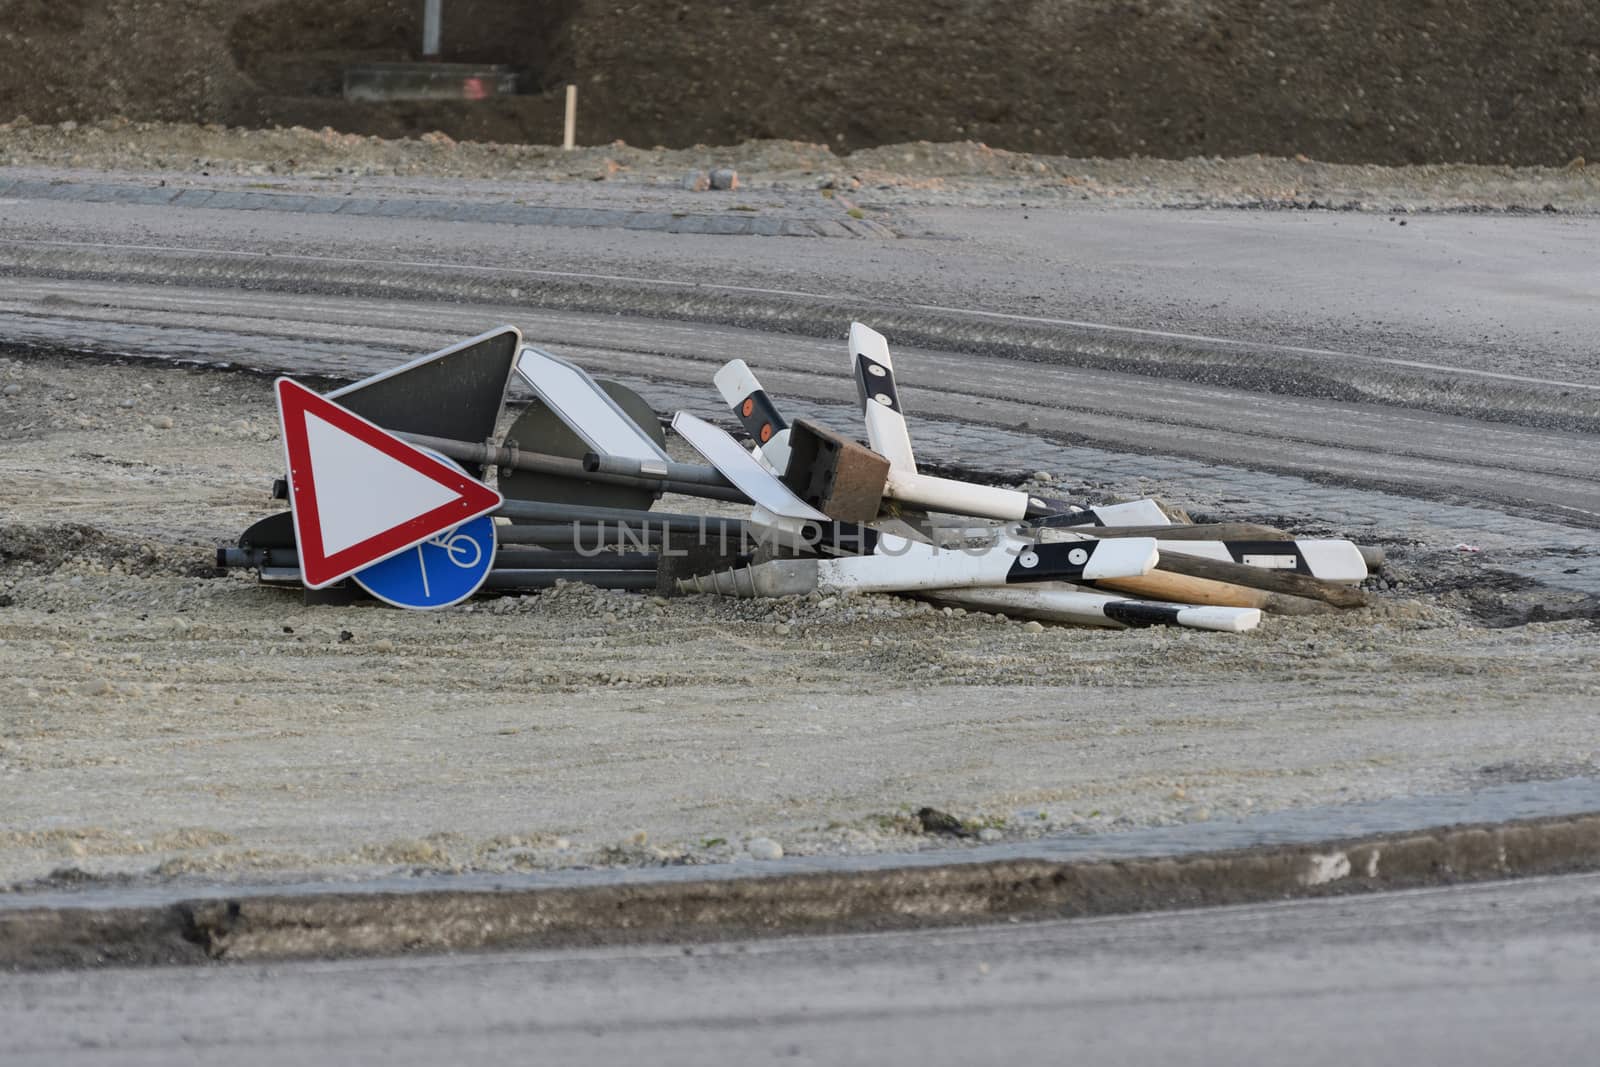 Piled street signs on a construction site in Maisach, Bavaria